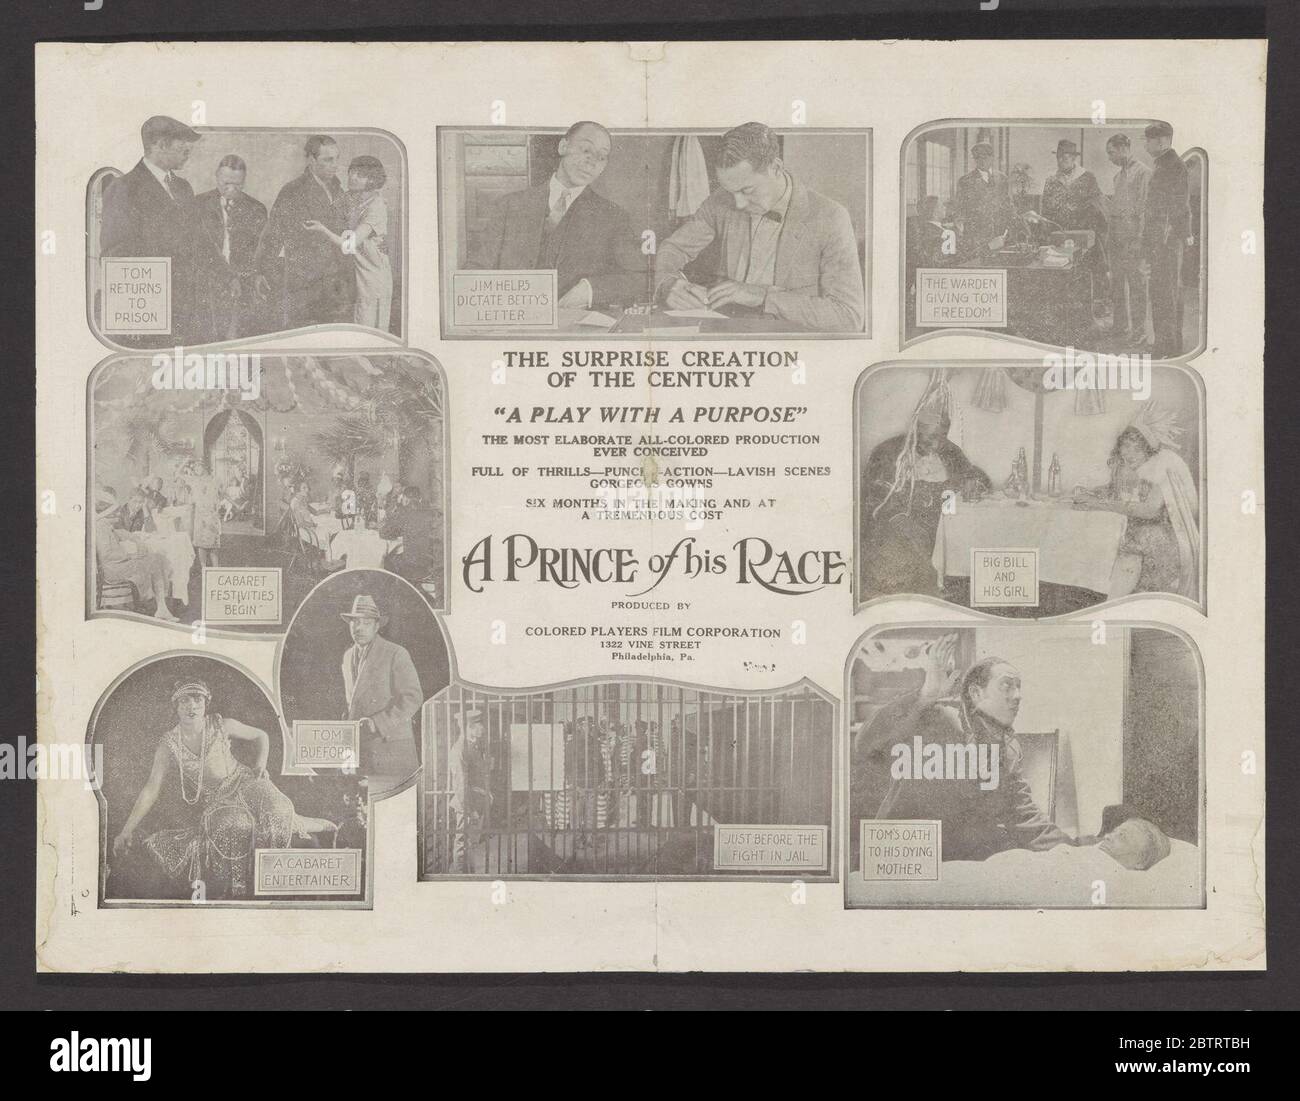 Advertisement for A Prince of His Race. A single sheet, black and white flier sized advertisement for the film A Prince of His Race. The advertisement featureseight vignettes of scenes from the movie arranged around the center. Each scene has a small card with a caption explaining the scene. Stock Photo